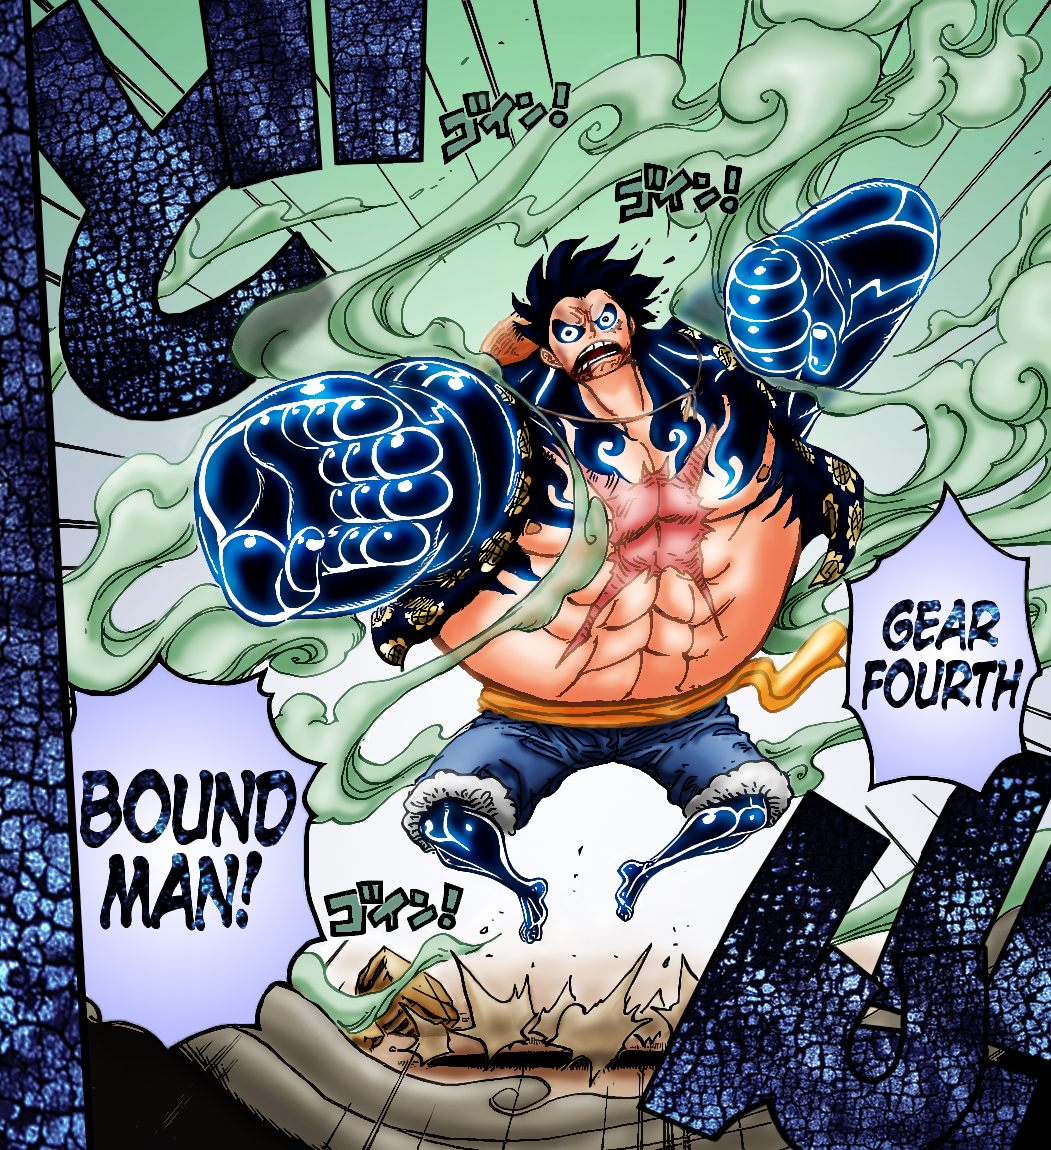 Luffy using gear fourth in one color background